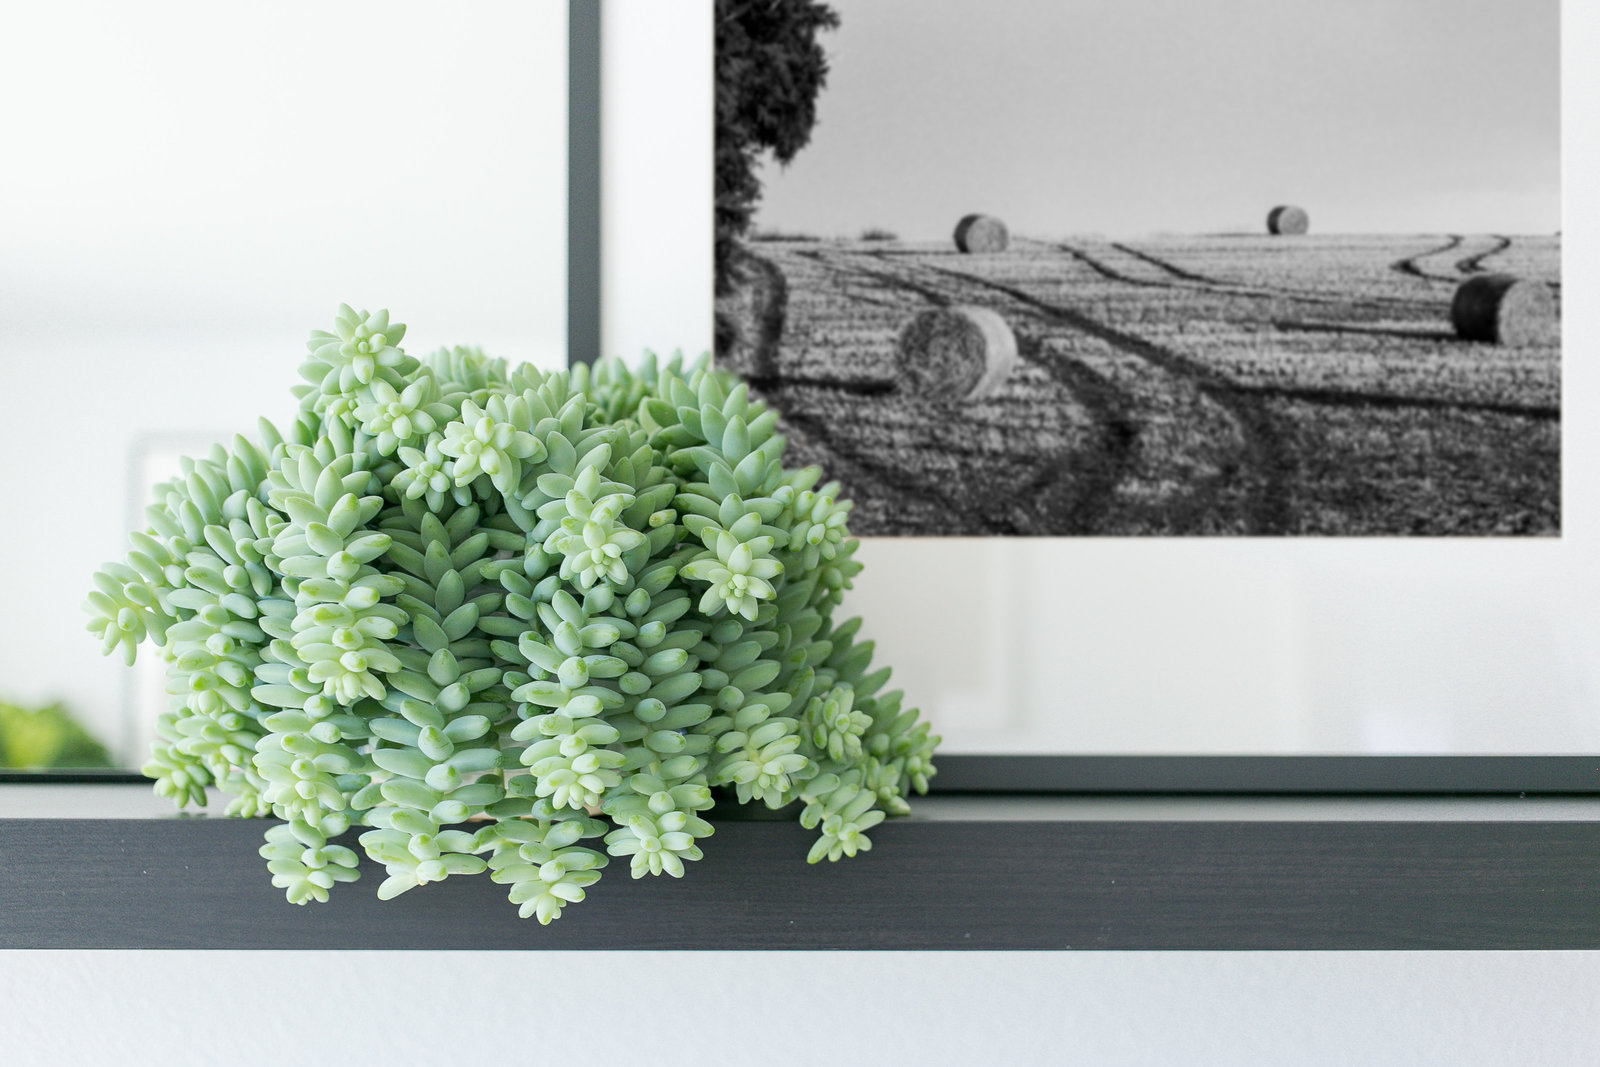 Modern BnB Living Room Design with black photo ledge, succulents for soft texture and black and relaxing black and white landscape prints.